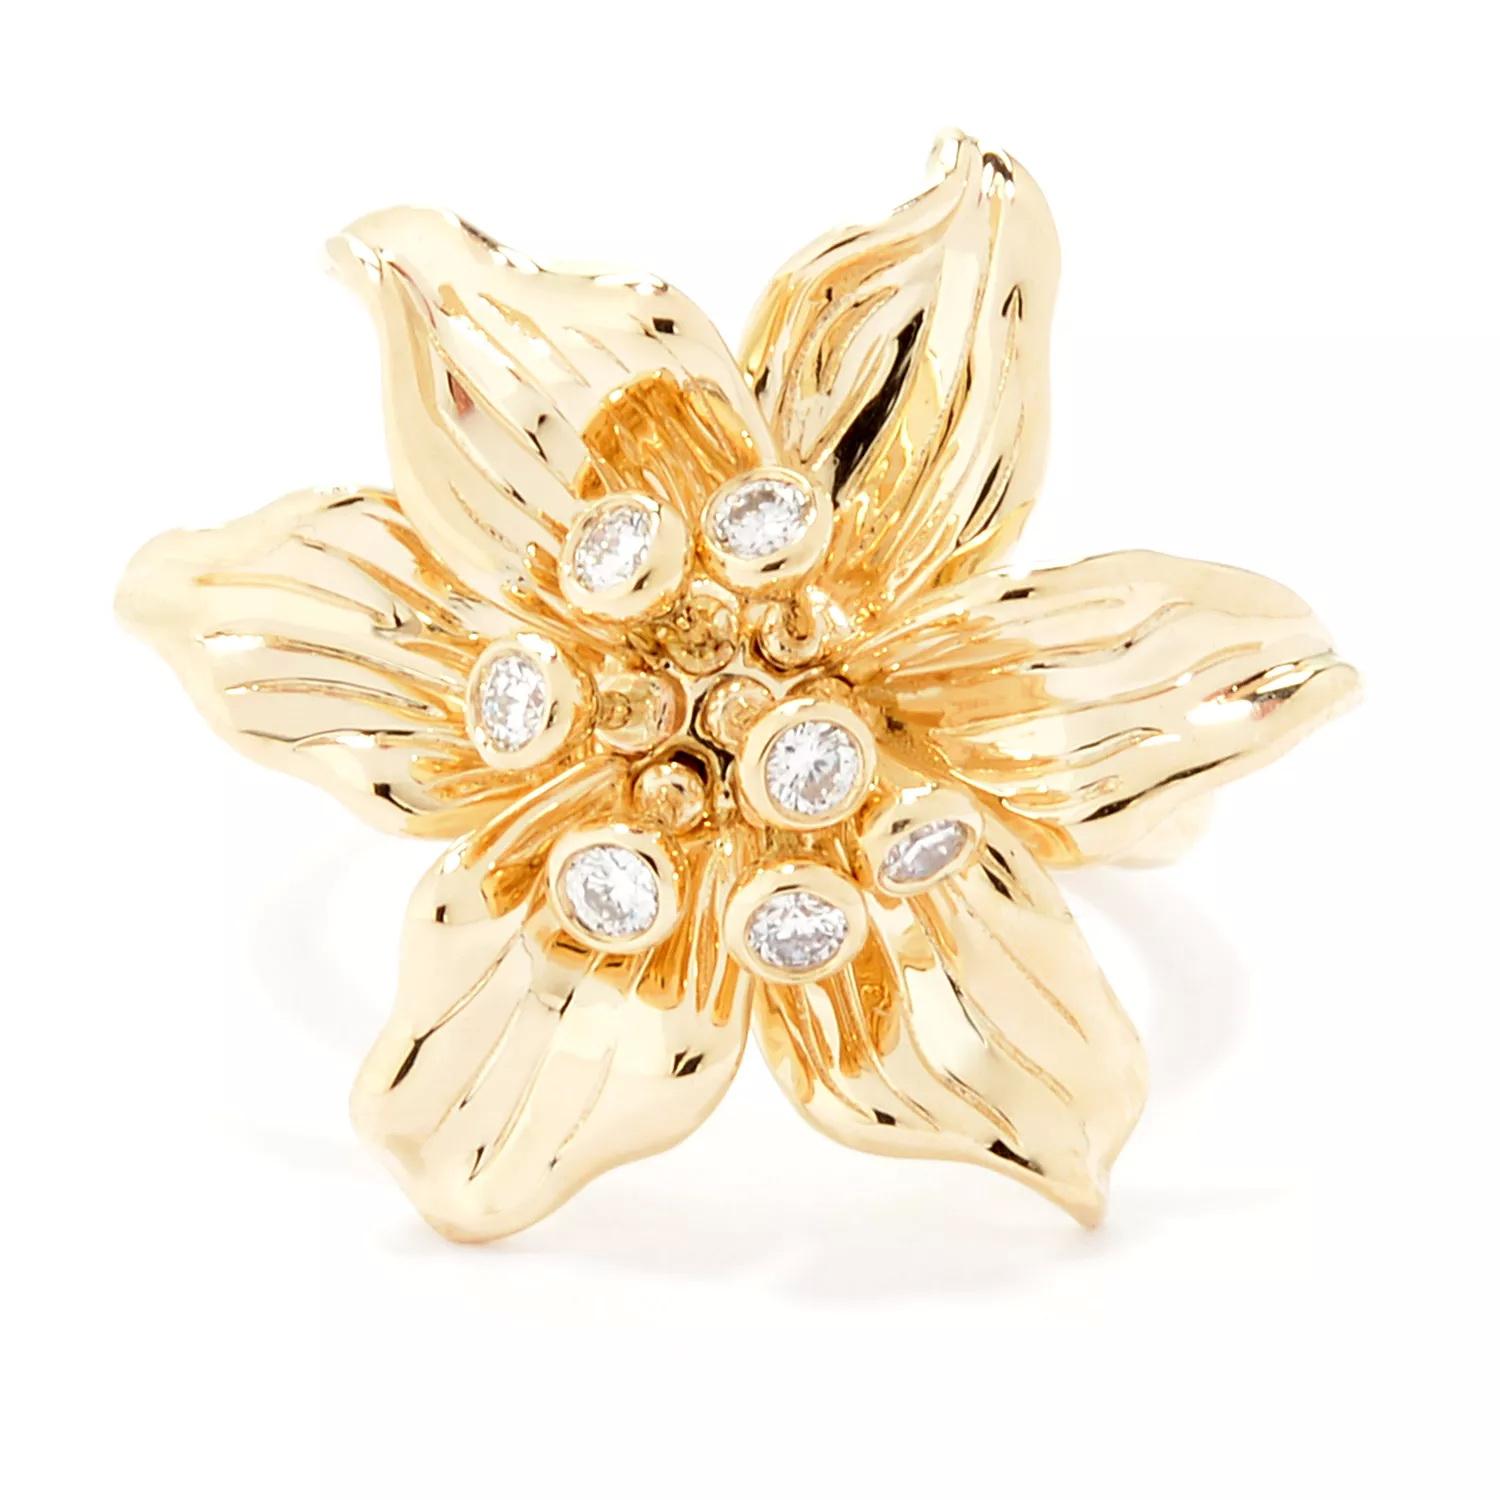 Experience the everlasting bloom of this stunning flower ring, radiating beauty throughout the year! Meticulously crafted from 14K gold, this exquisite piece is adorned with diamond accents, adding a mesmerizing sparkle to its already captivating